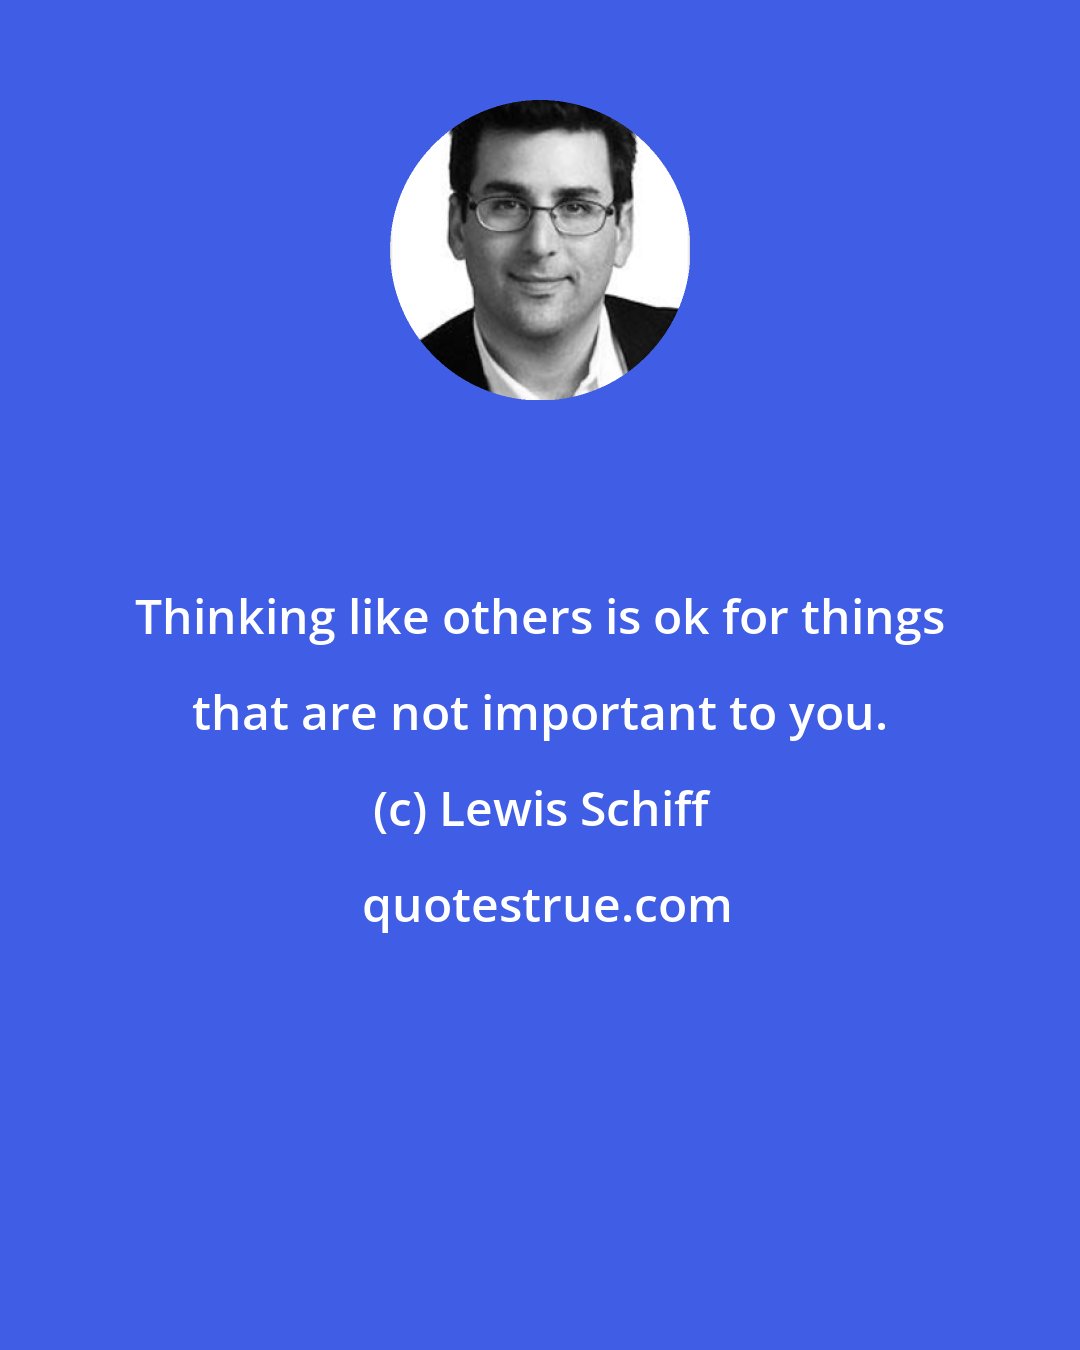 Lewis Schiff: Thinking like others is ok for things that are not important to you.